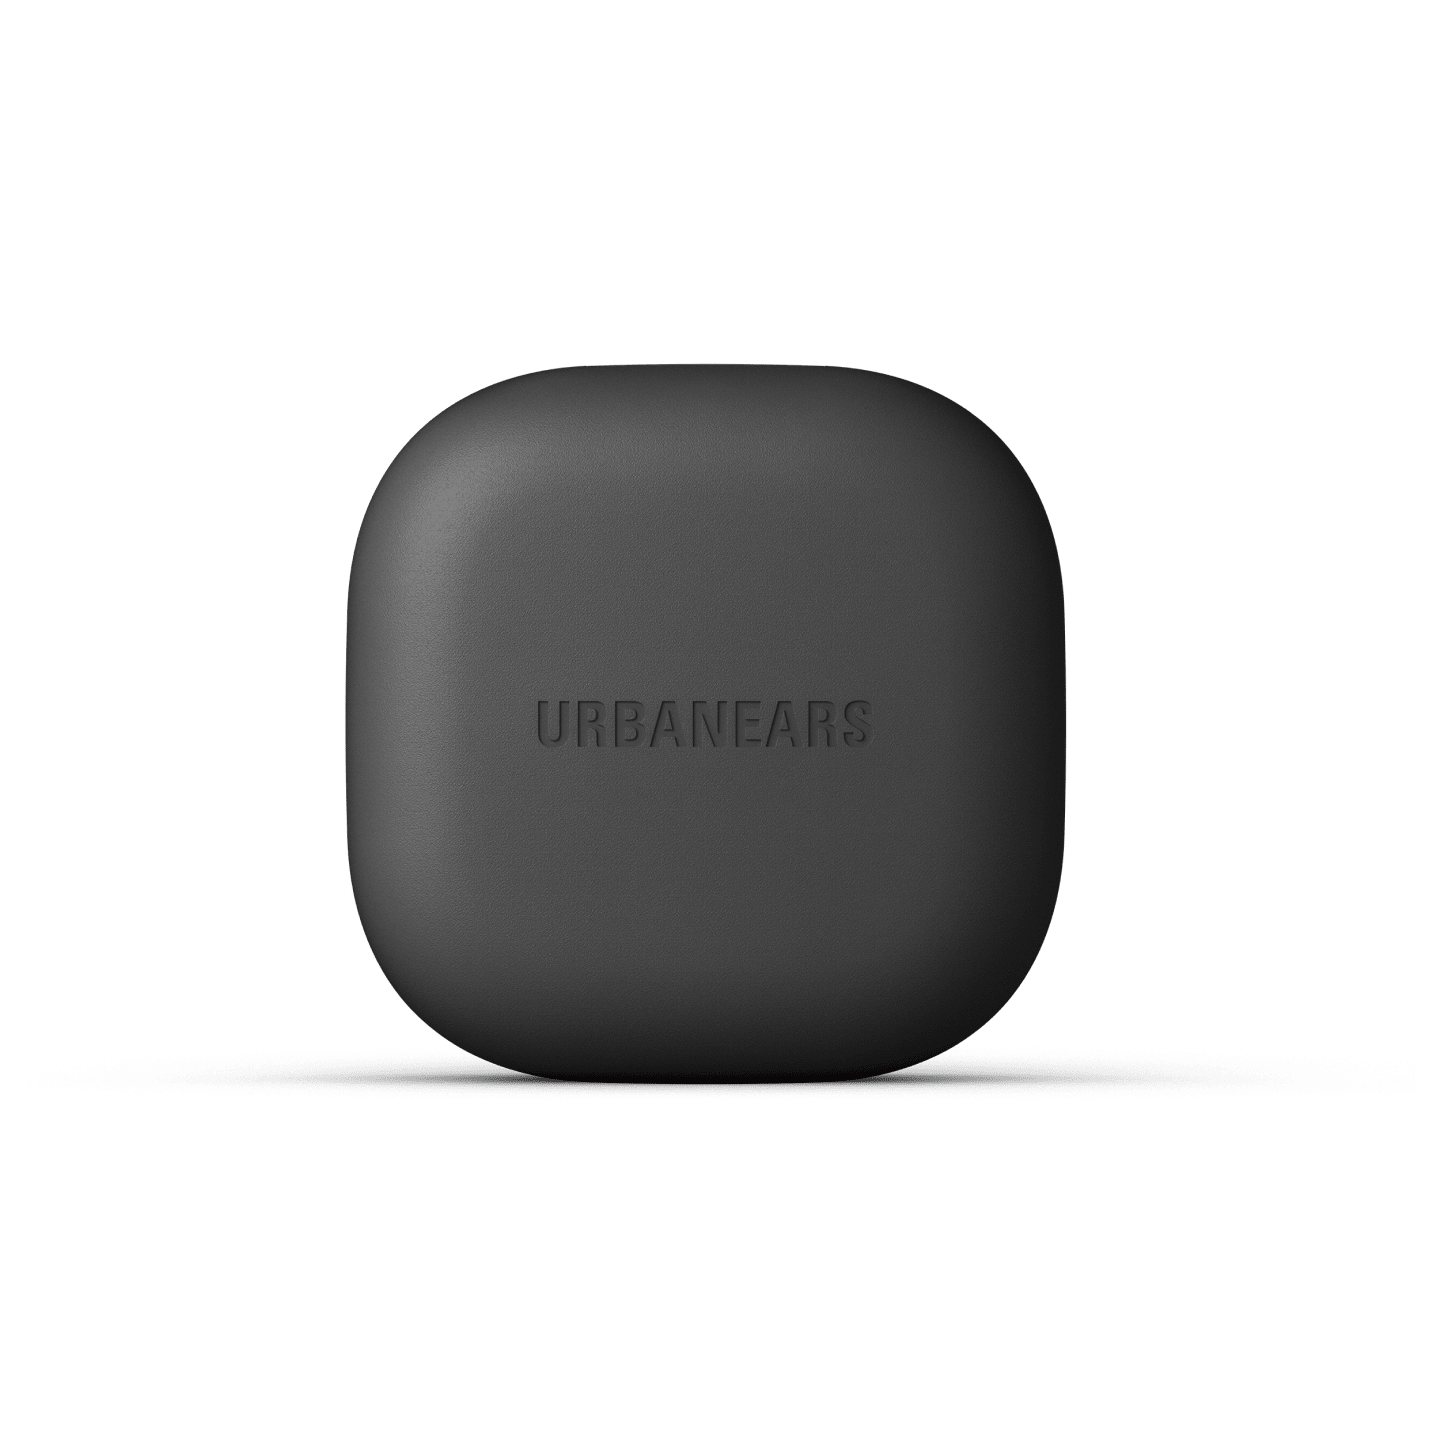 Urbanears Alby Charging Case Charcoal Black Image 6